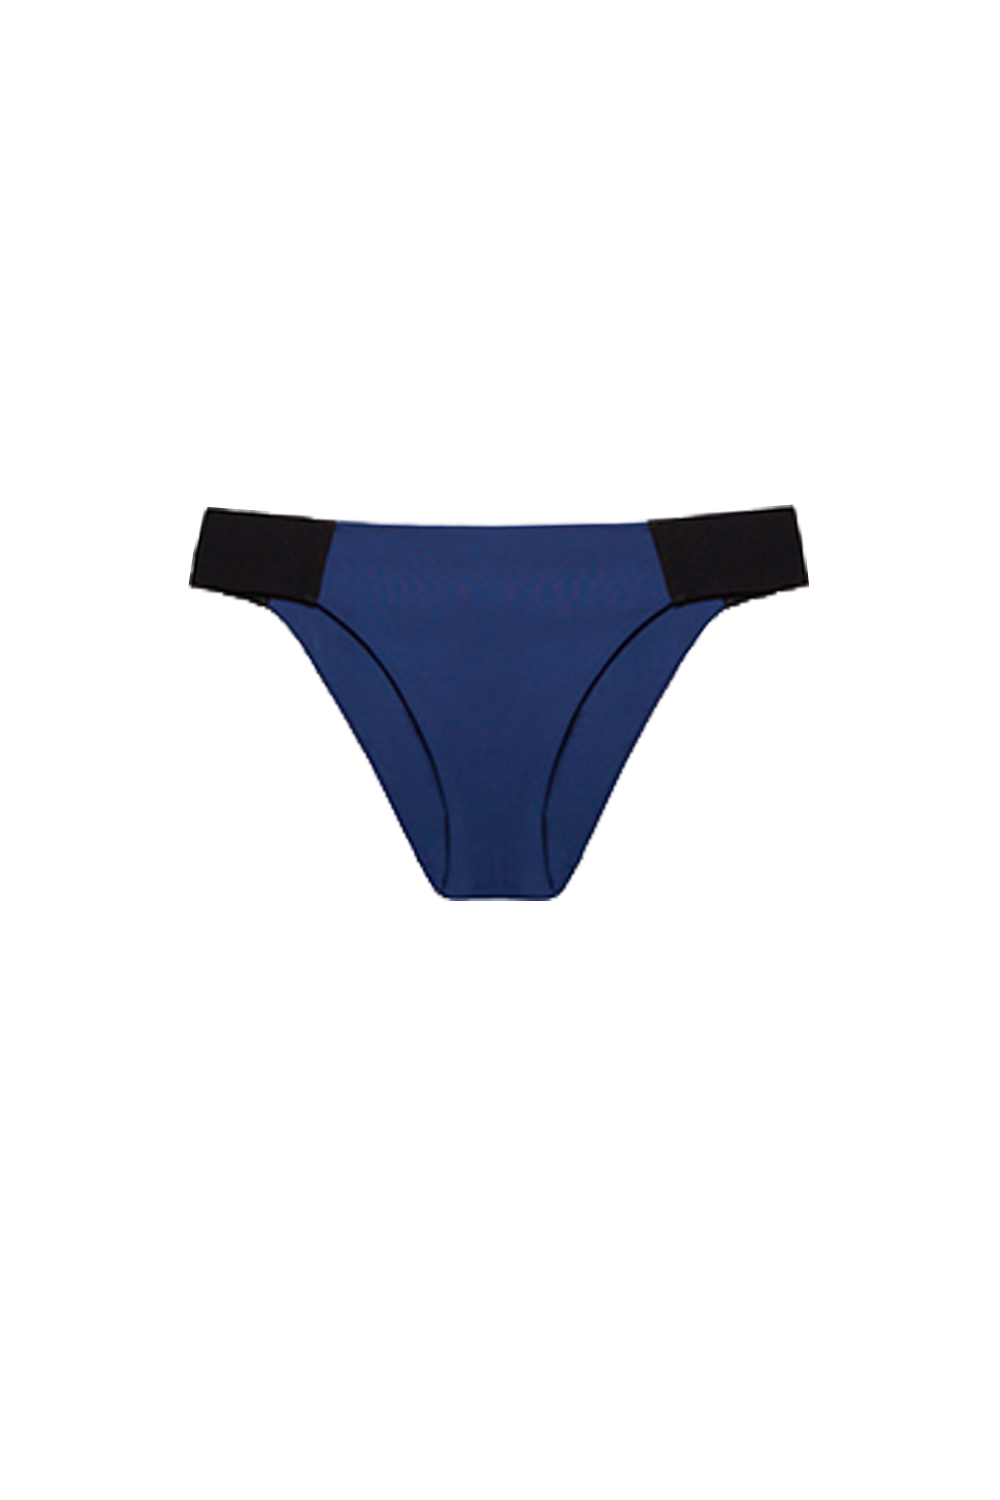 Krabi bottom in abyss by NOW_THEN, eco friendly and sustainable bikini made of recycled nylon and ethical manufacturing, handmade in Spain